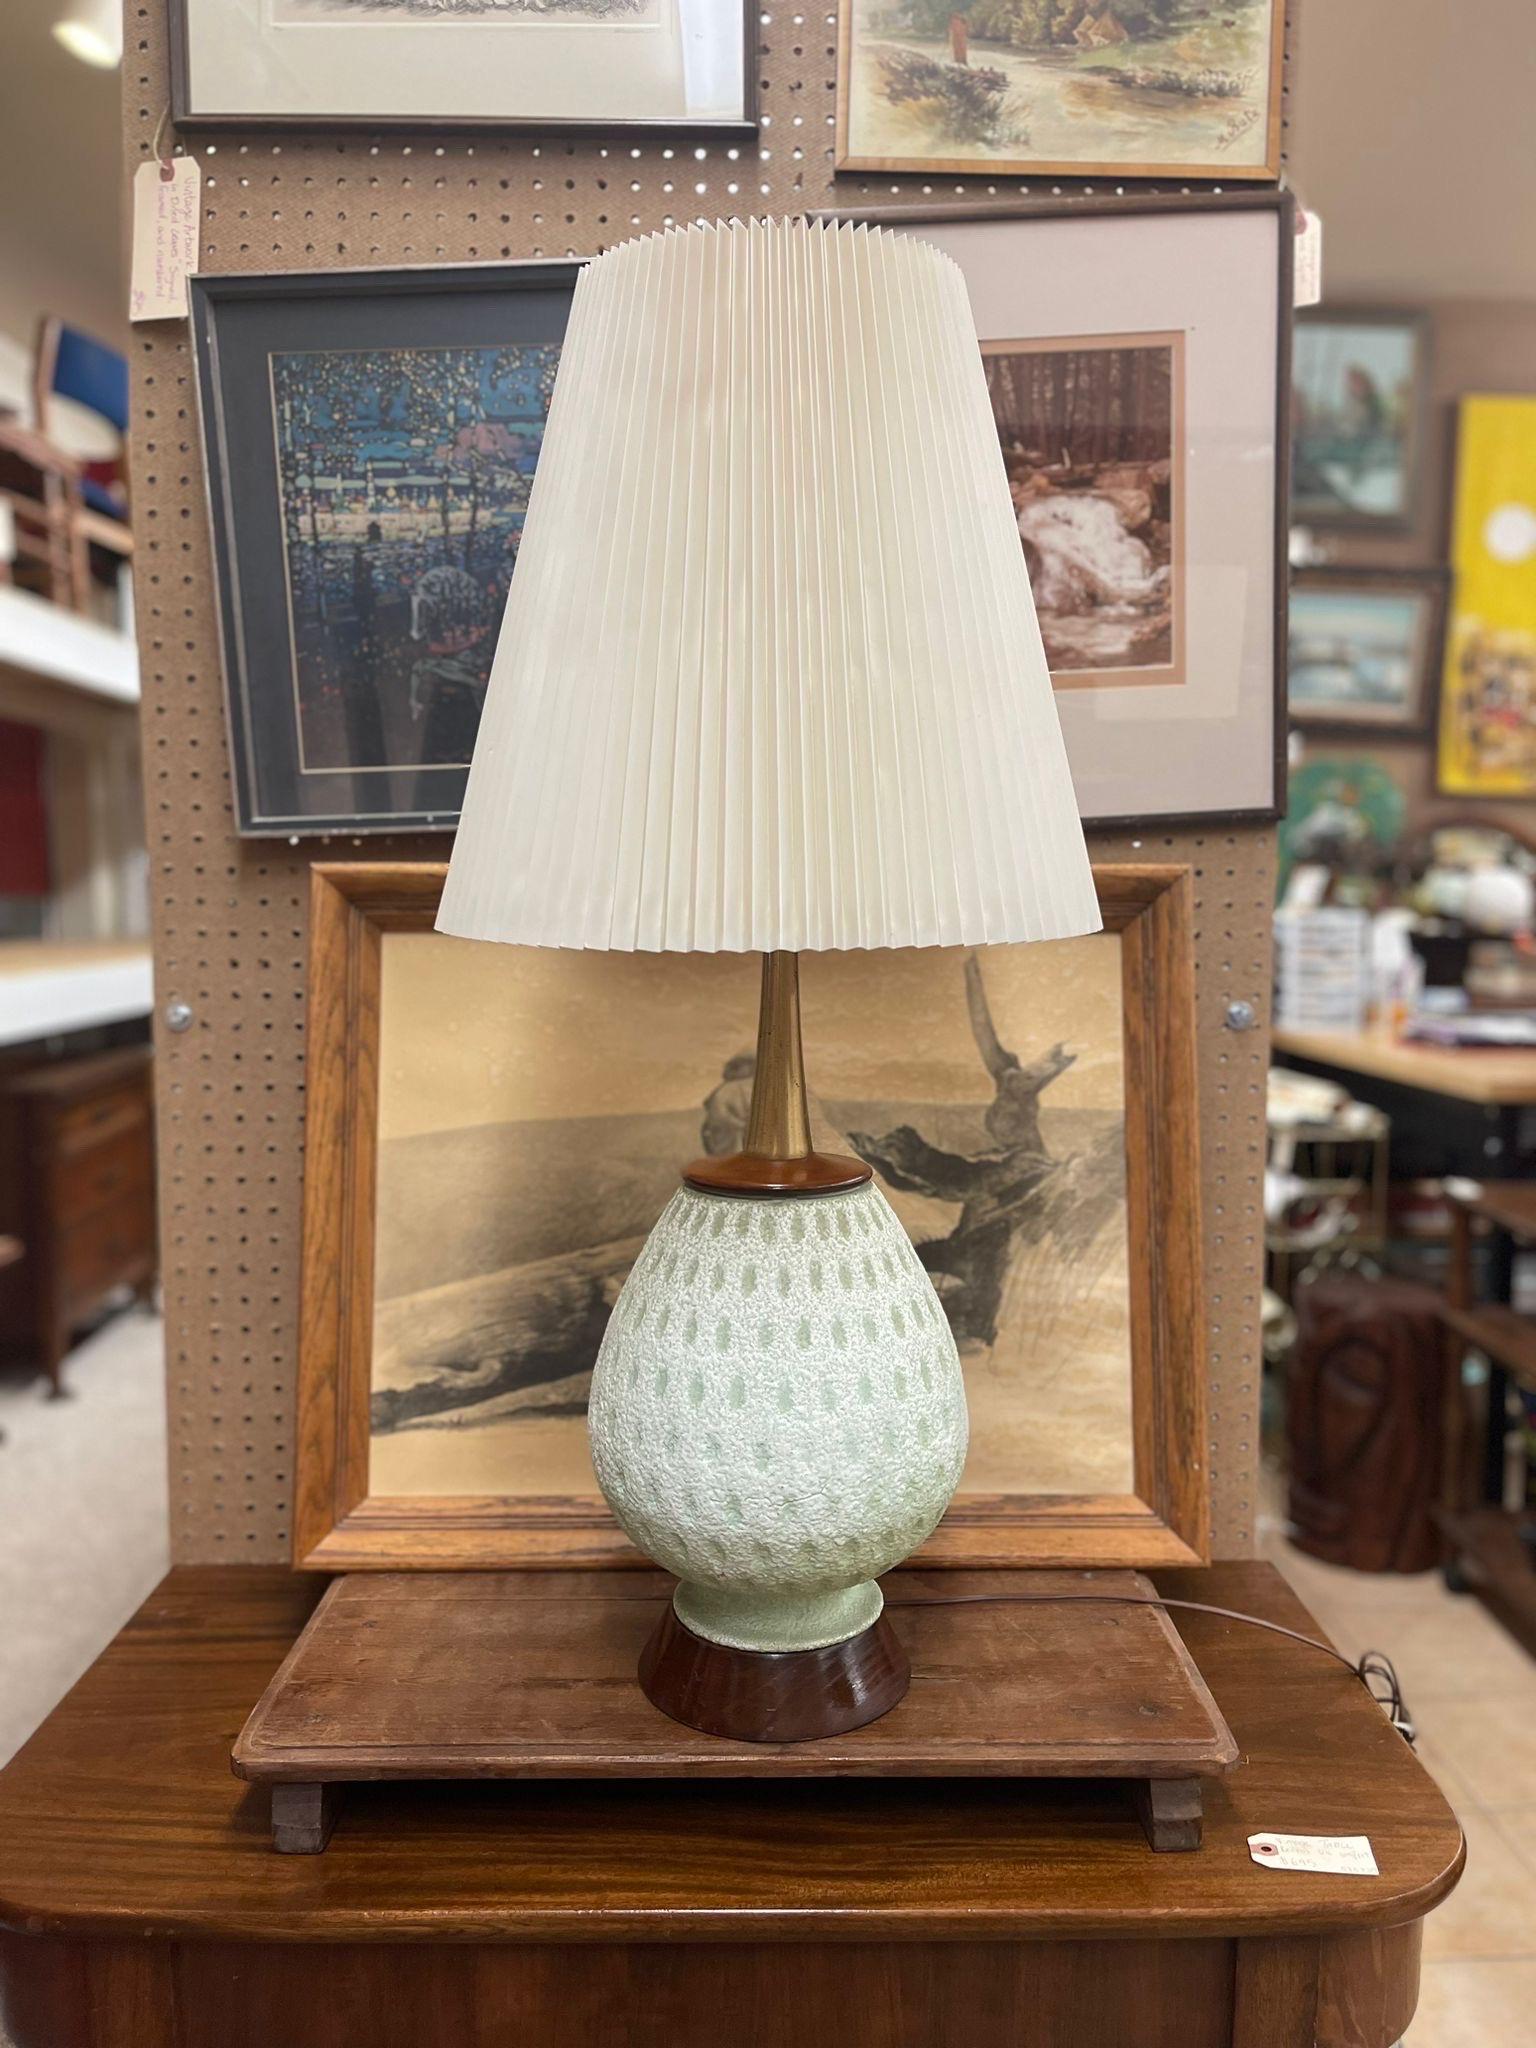 Ceramic Base is off White Tinted Green as Pictured. Pleated Tall Lamp Shade is Included. Operational Ability Unknown. Brass Toned Hardware,walnut Tone Wood. Nice Aged Aspects throughout. Vintage Condition Consistent with Age as